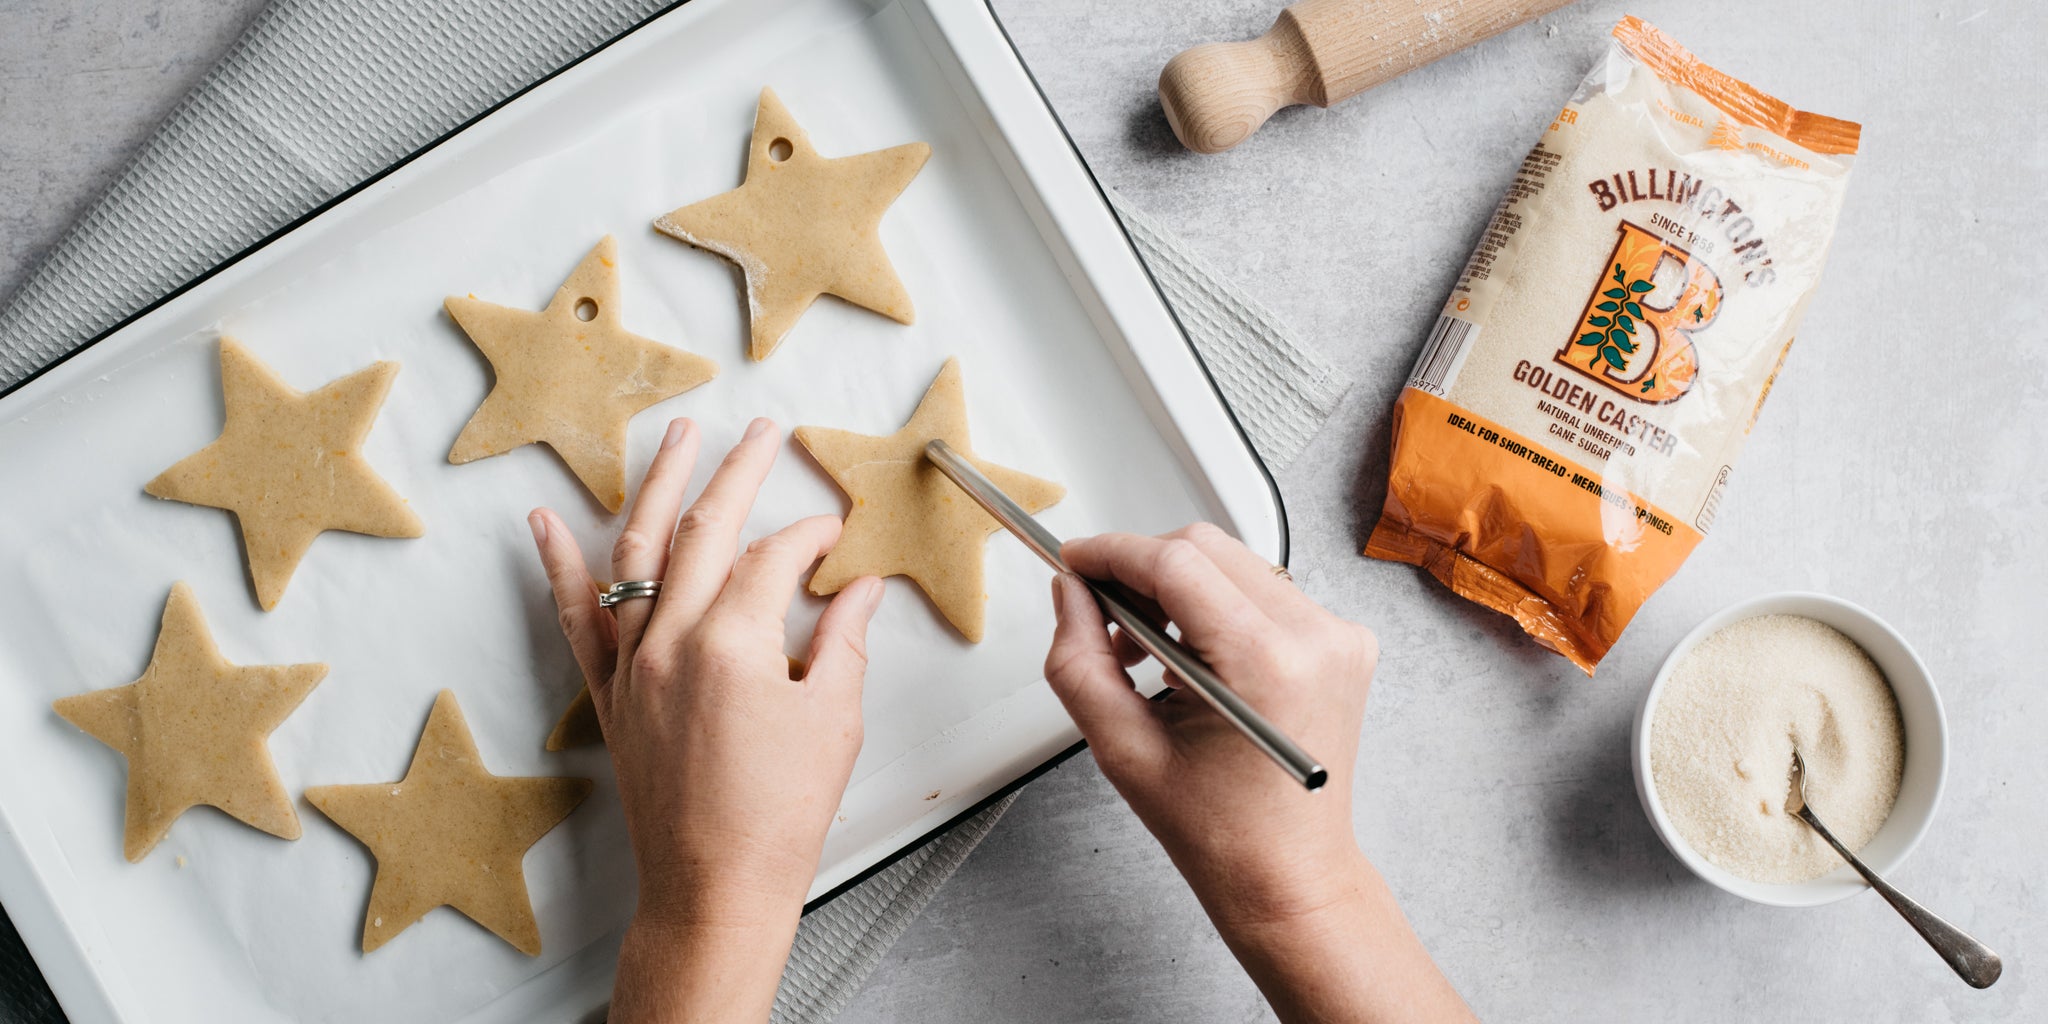 Orange & Ginger shortbread stars being hand decorated, punching a hole into the dough to hang with ribbon once baked. Next to a bag of Billington's golden caster sugar